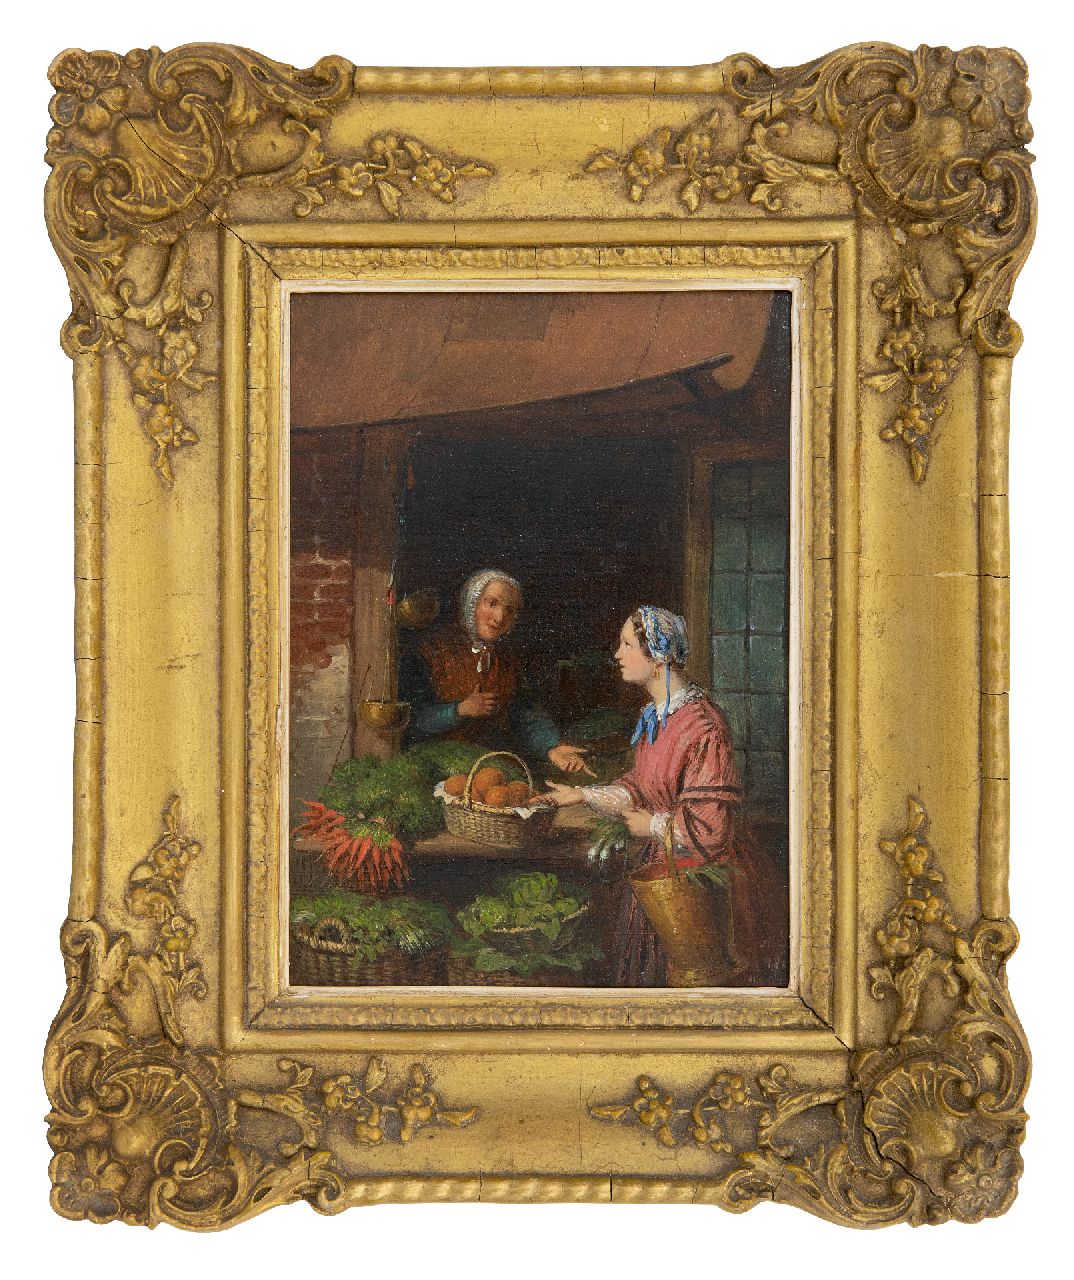 Scheerboom A.  | Andries Scheerboom | Paintings offered for sale | The vegetable seller, oil on panel 34.4 x 25.9 cm, signed l.r. with initials and dated 1861